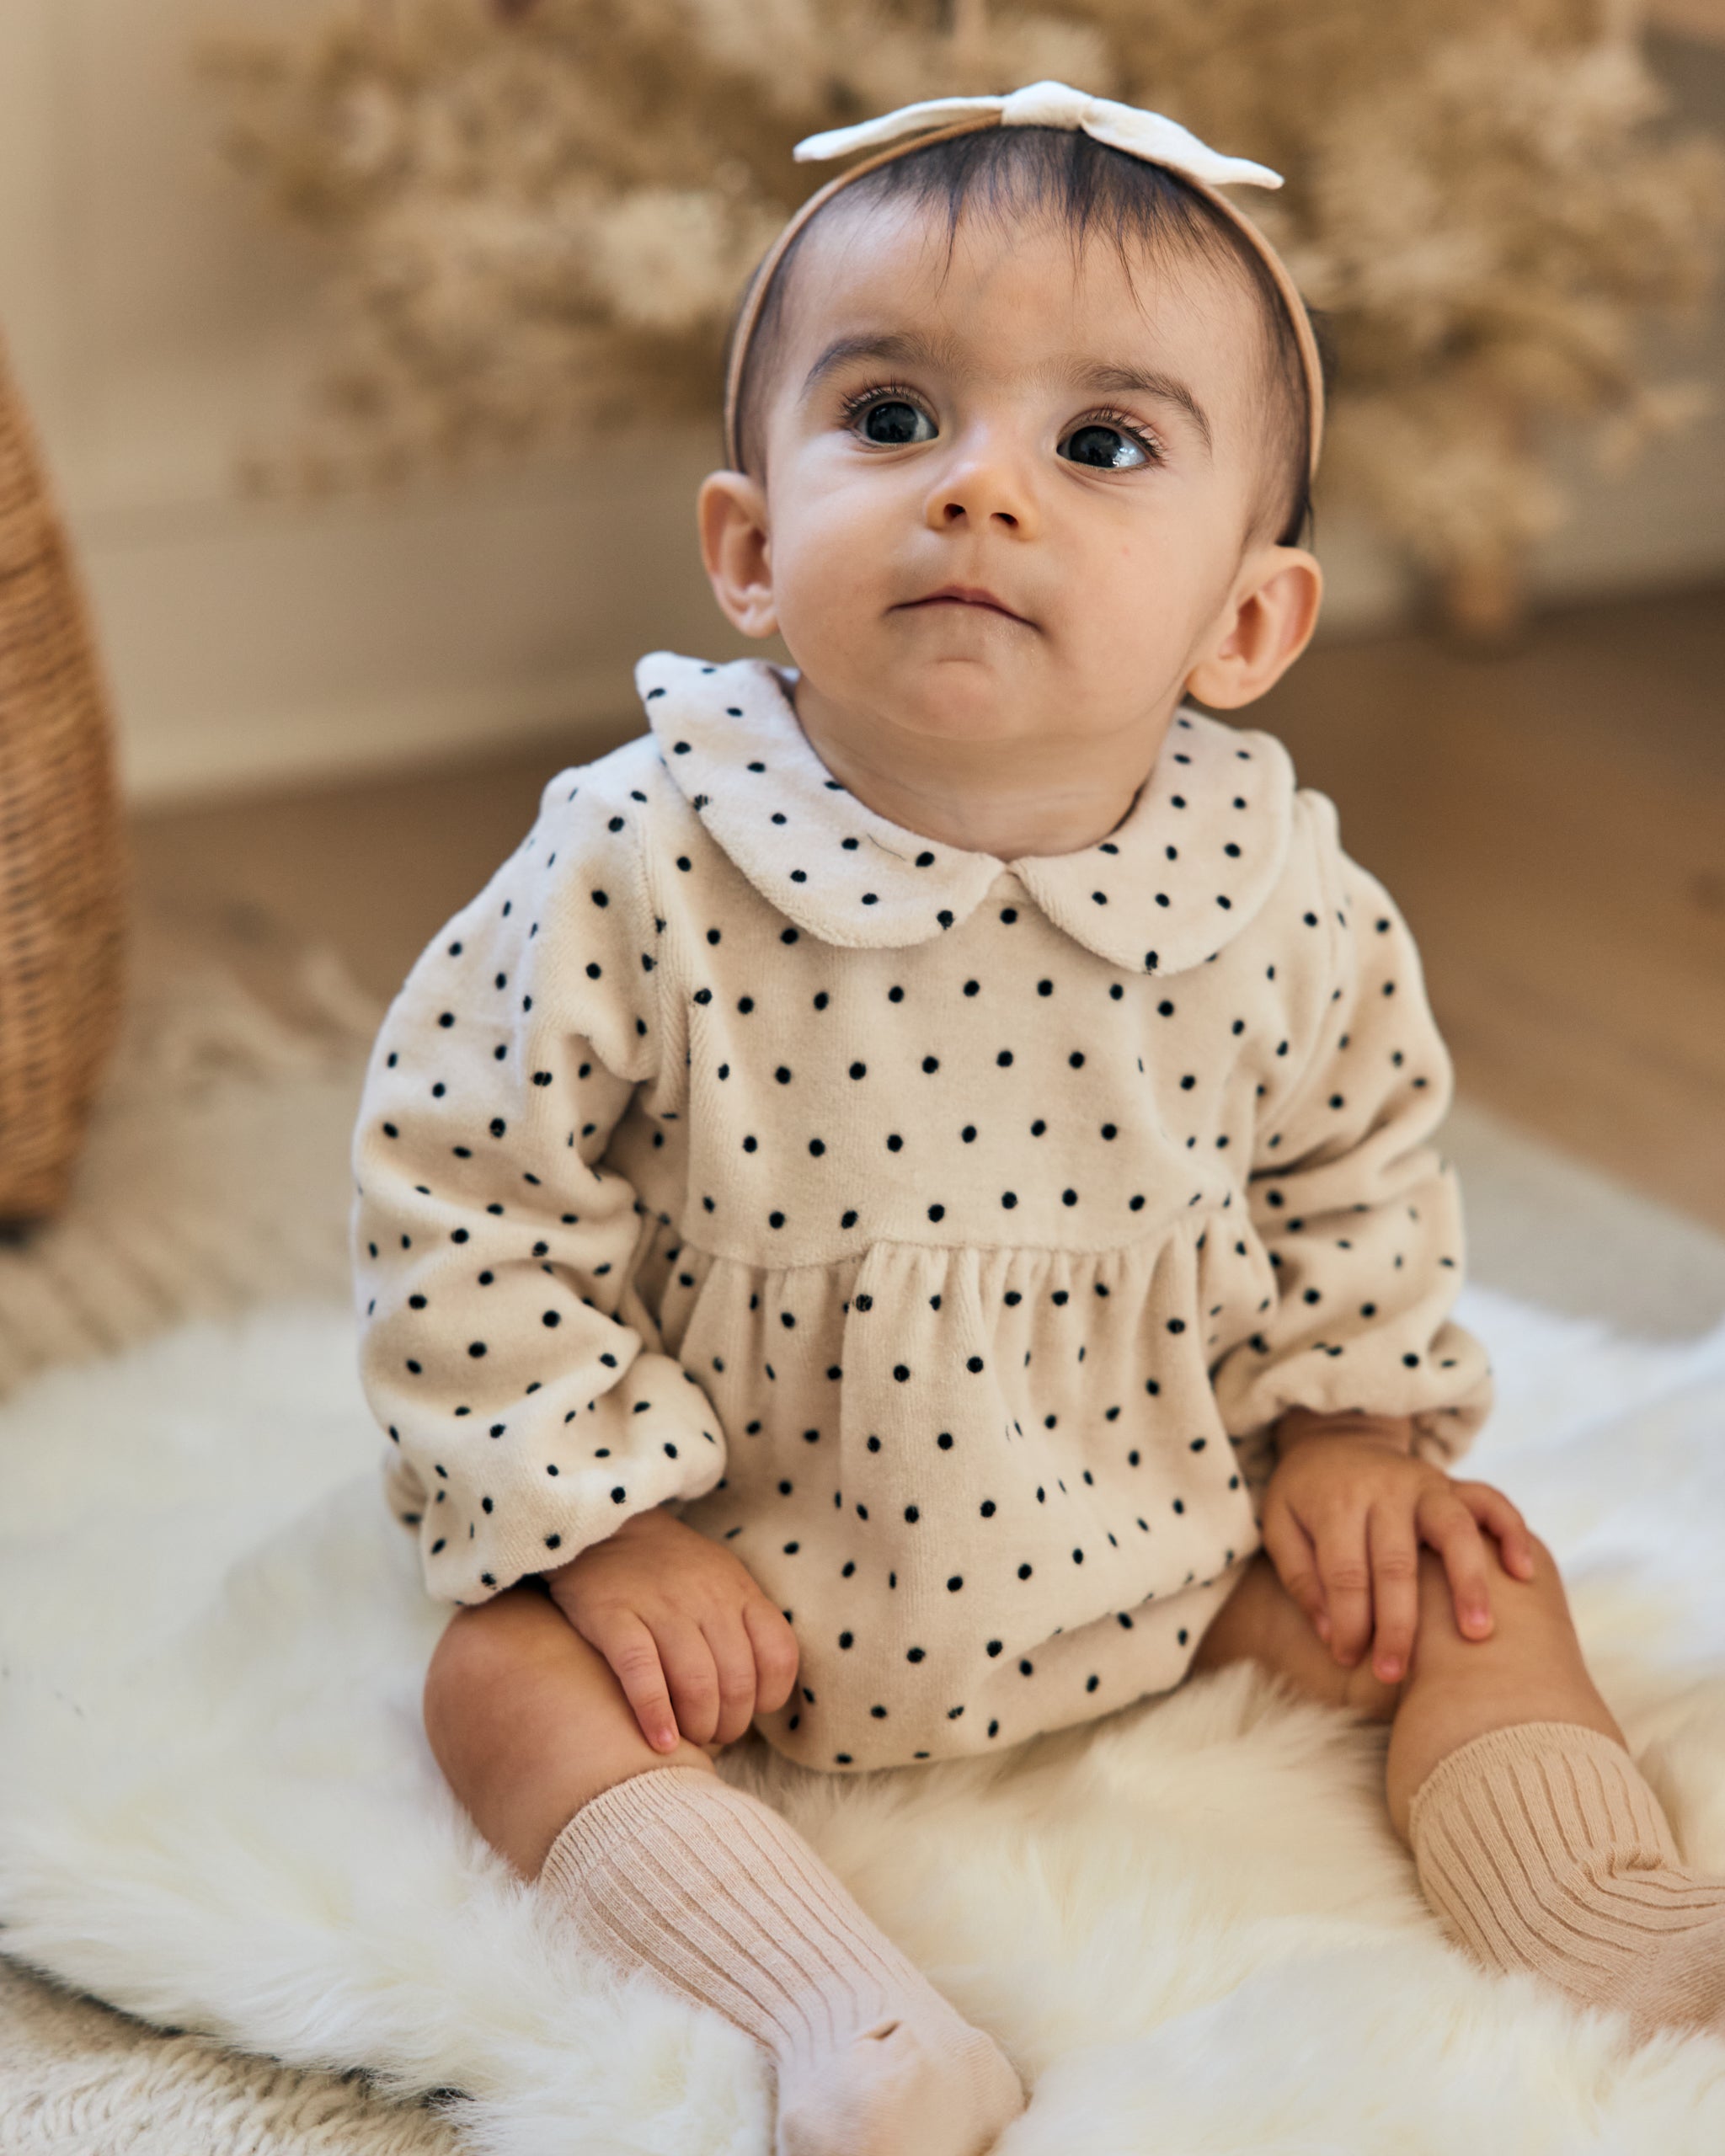 Peter Pan Romper || Polka Dot - Rylee + Cru | Kids Clothes | Trendy Baby Clothes | Modern Infant Outfits |